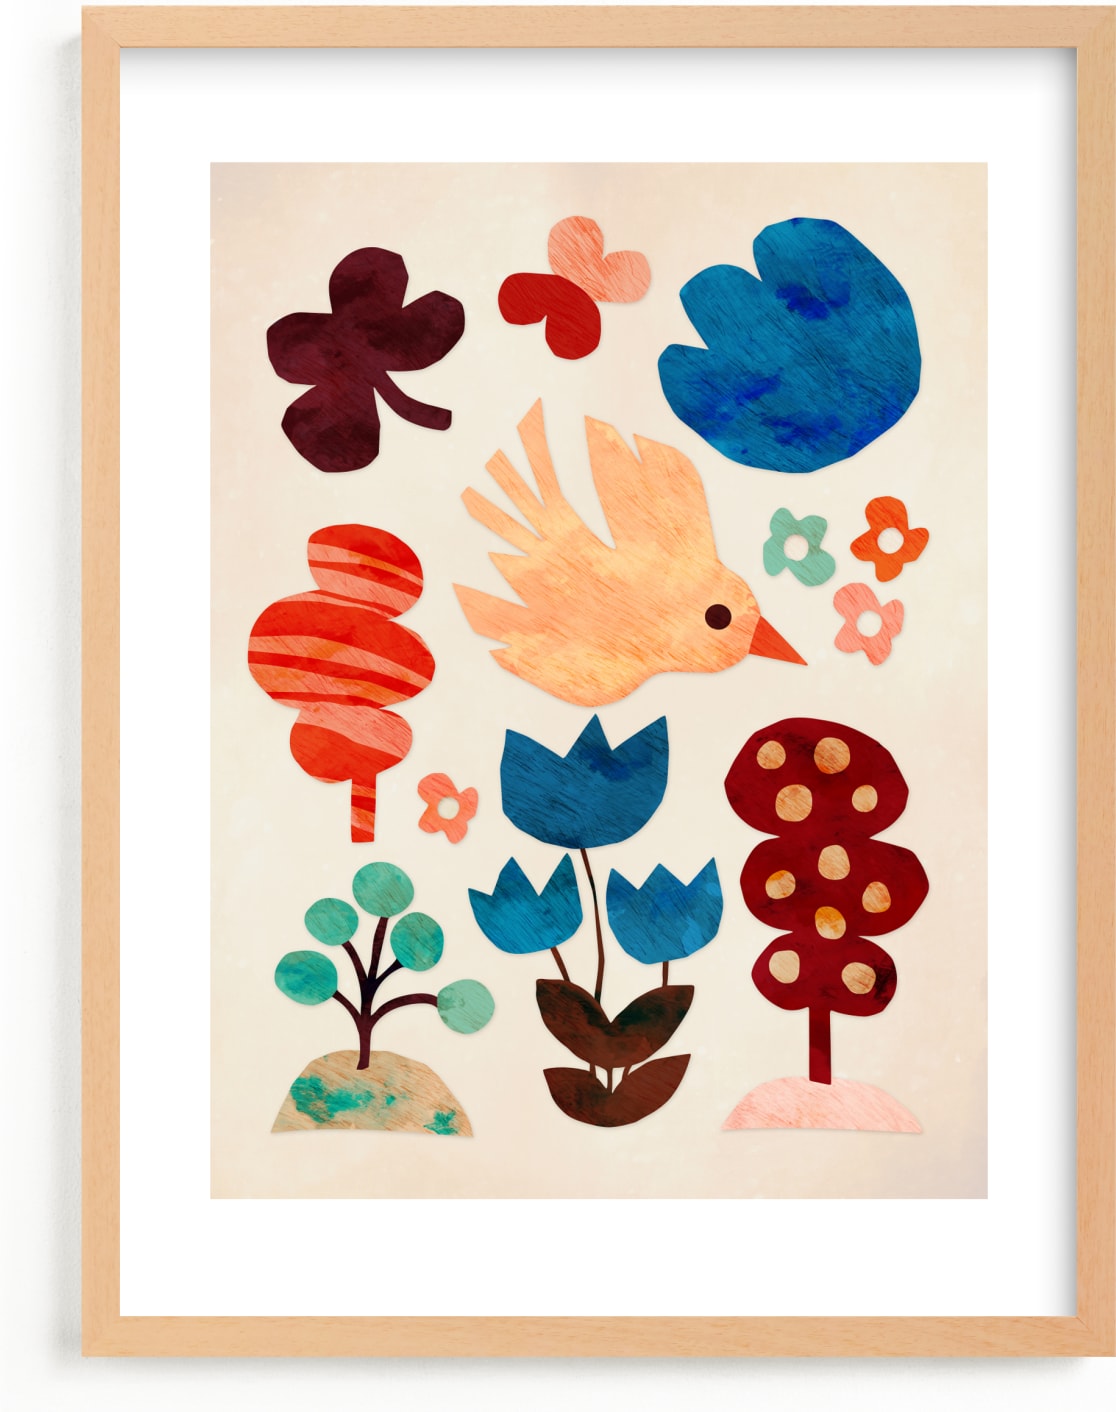 This is a blue, colorful, beige kids wall art by Mojca Dolinar called Bird and the forest.